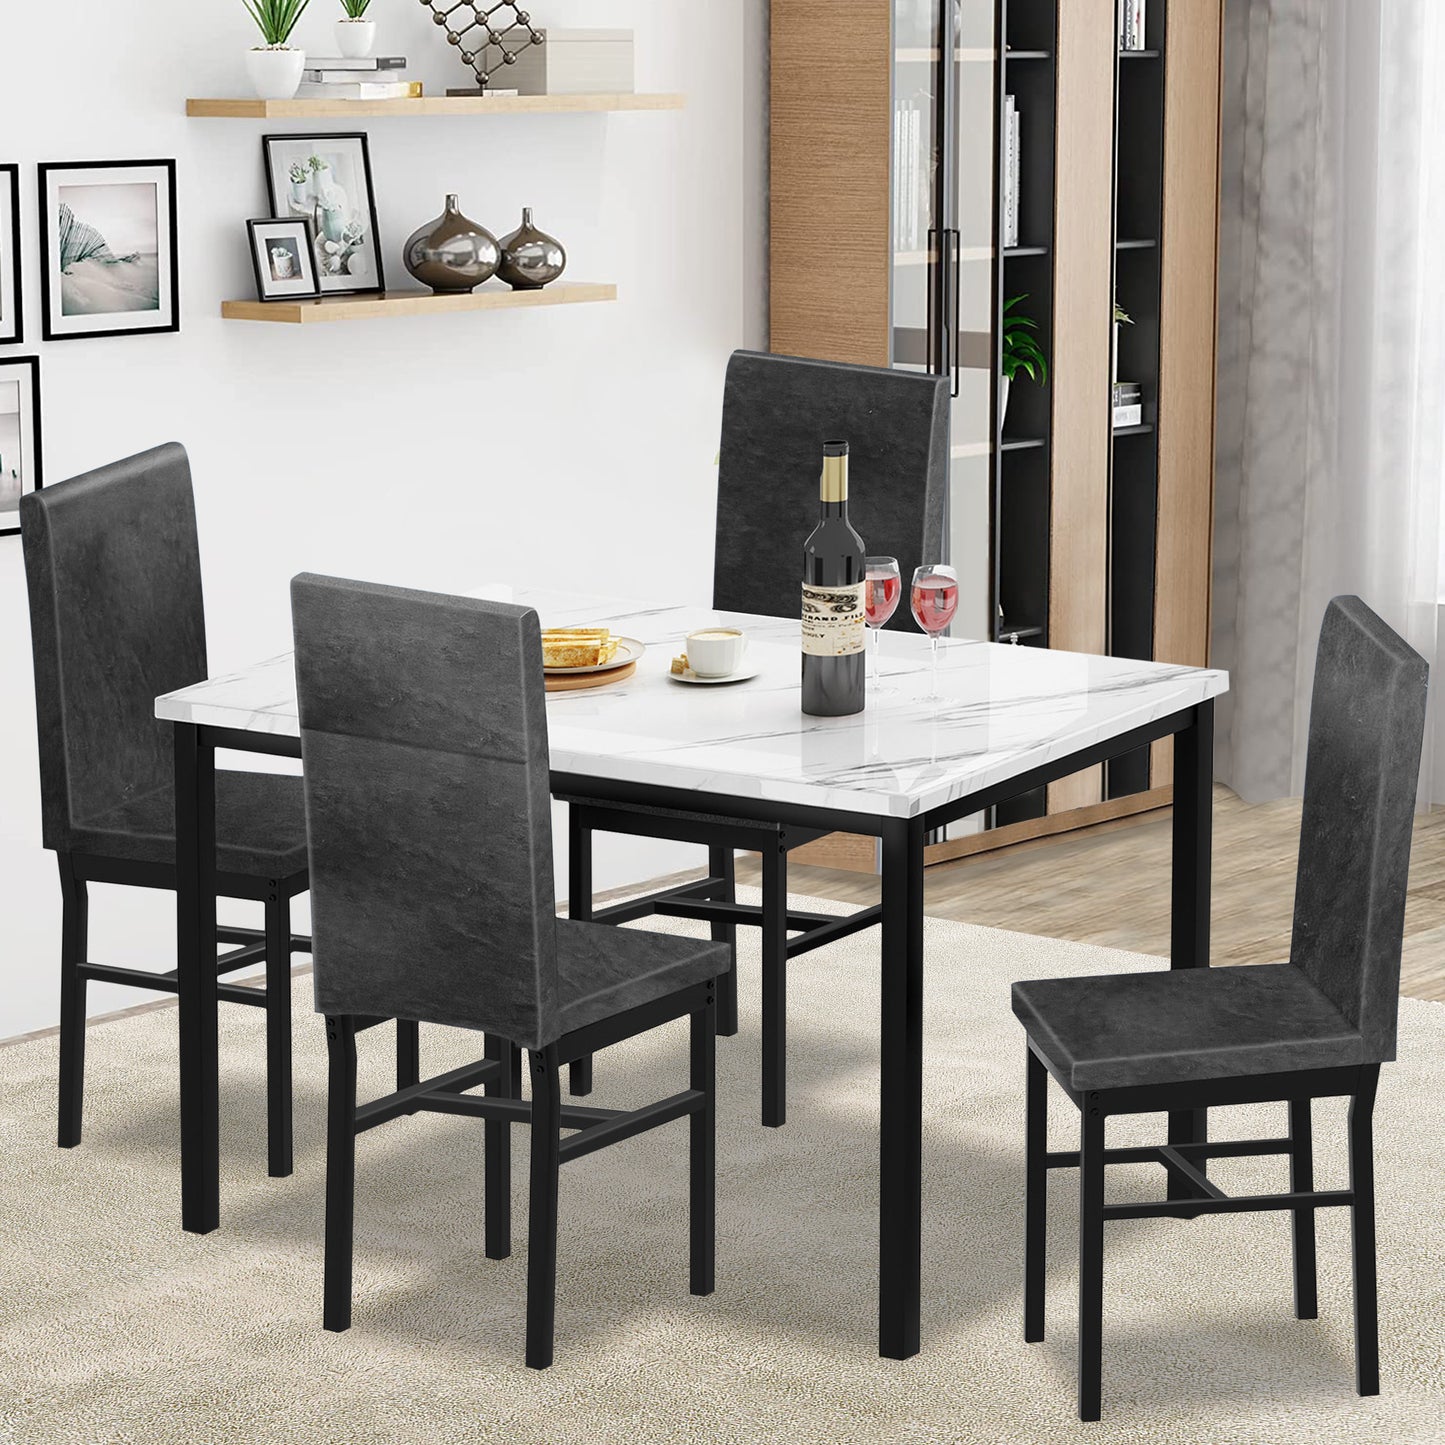 SYNGAR 5 Piece Dining Table Set, Kitchen Dining Table and Chairs Set for 4, Modern Marble Table and 4 PU Leather Upholstered Chairs, Home Dining Set for Small Space, Breakfast Nook, White, D8530